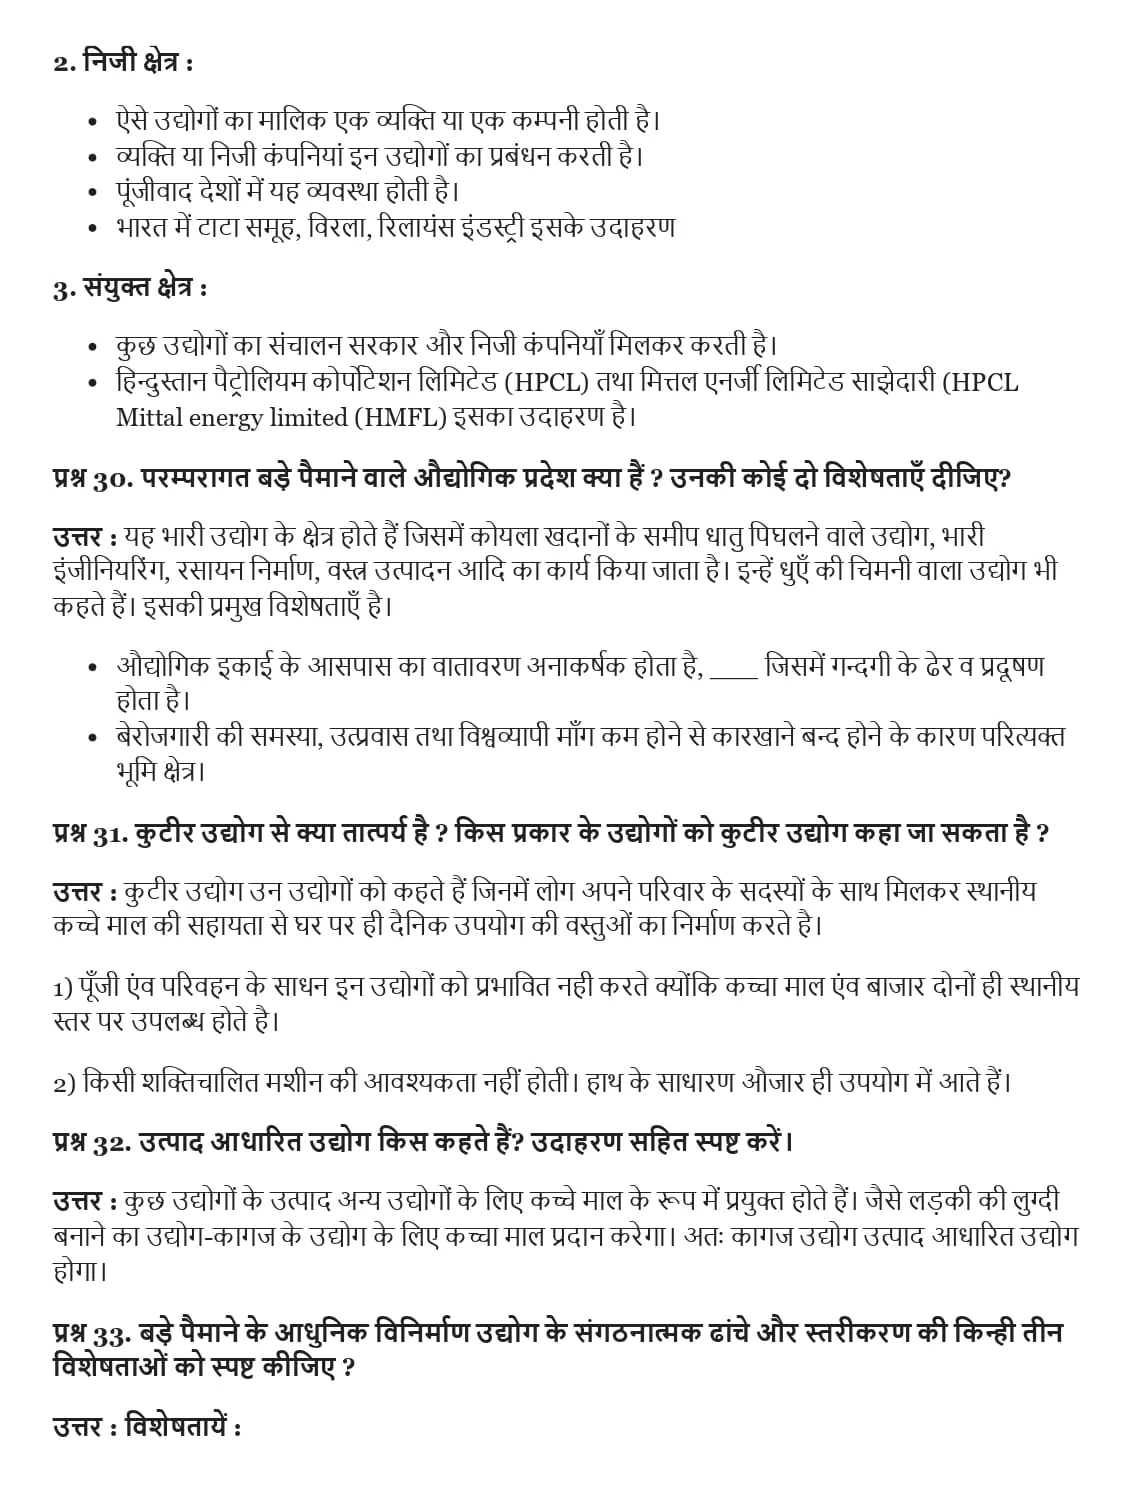 UP Board Important Questions Class 12 Chapter 6 005